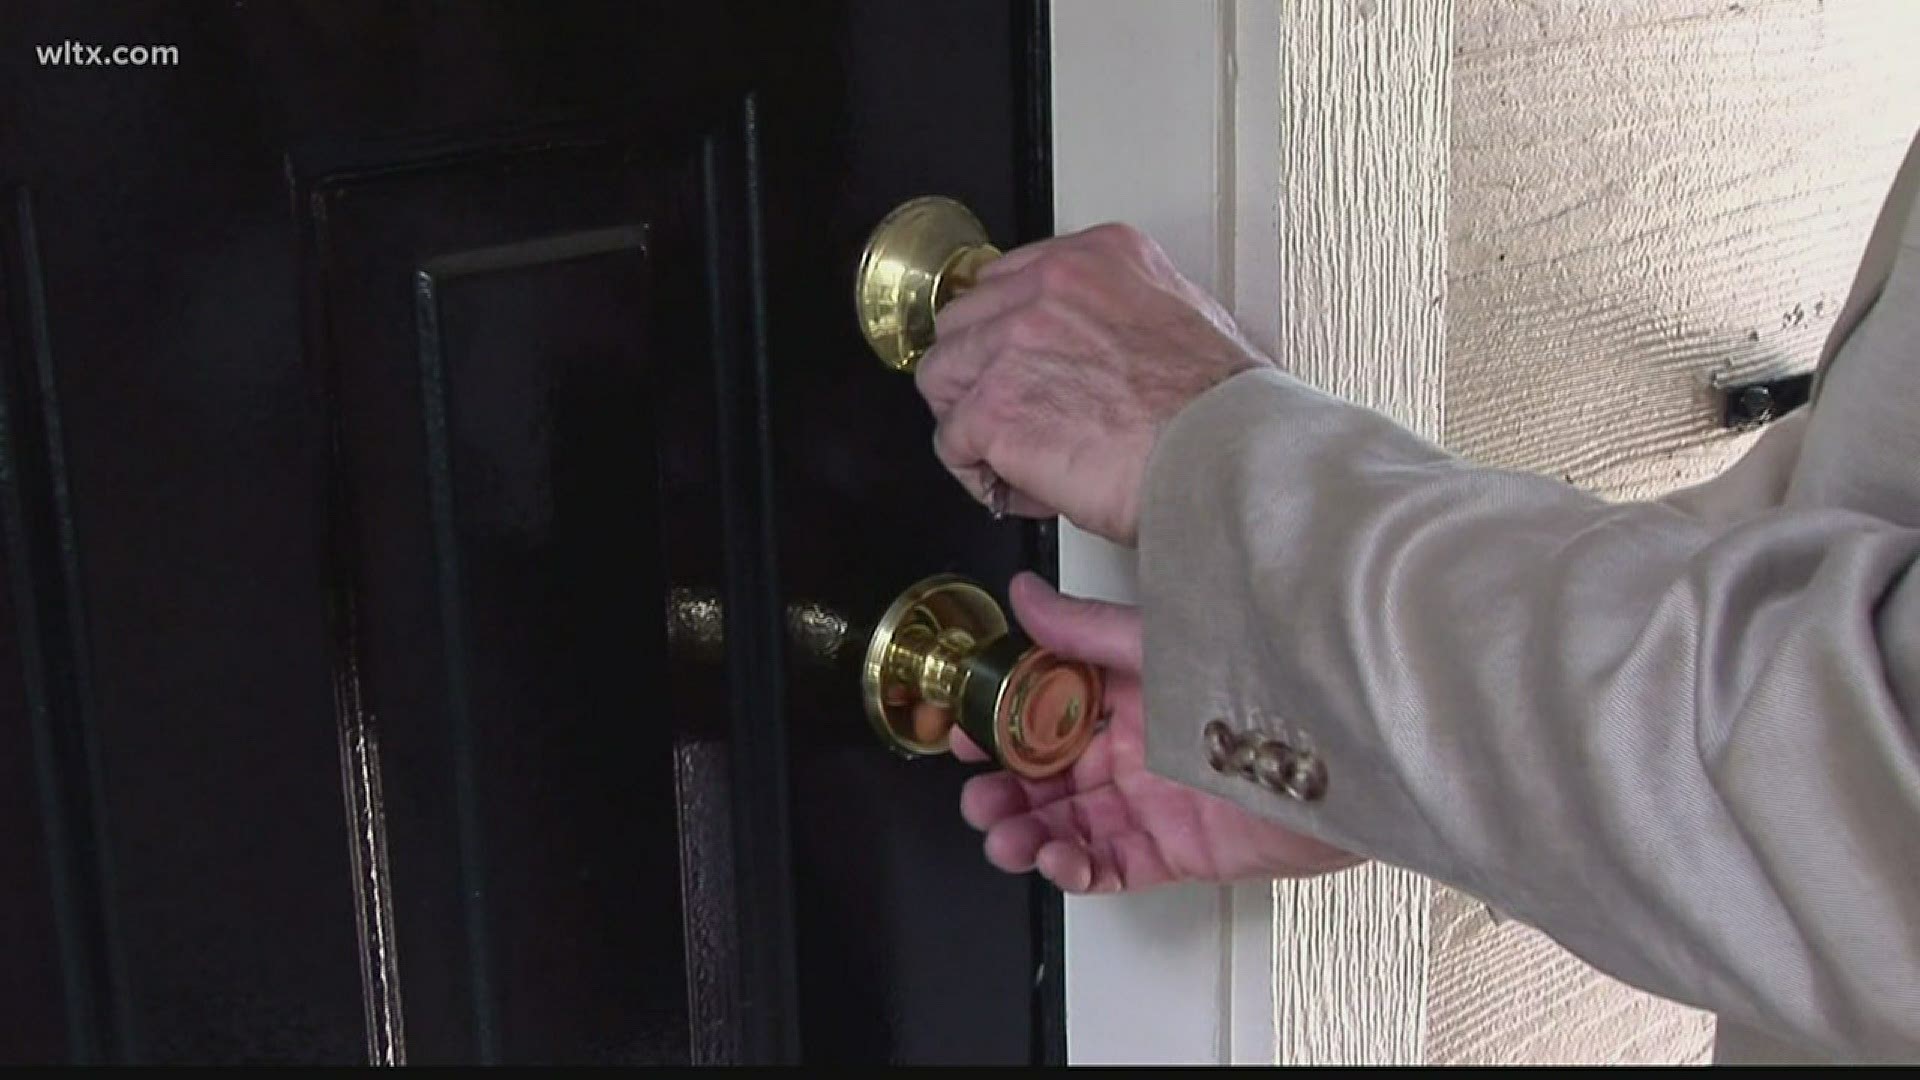 For thousands facing eviction in the Palmetto State due to the coronavirus, a new program is helping pay the rent.